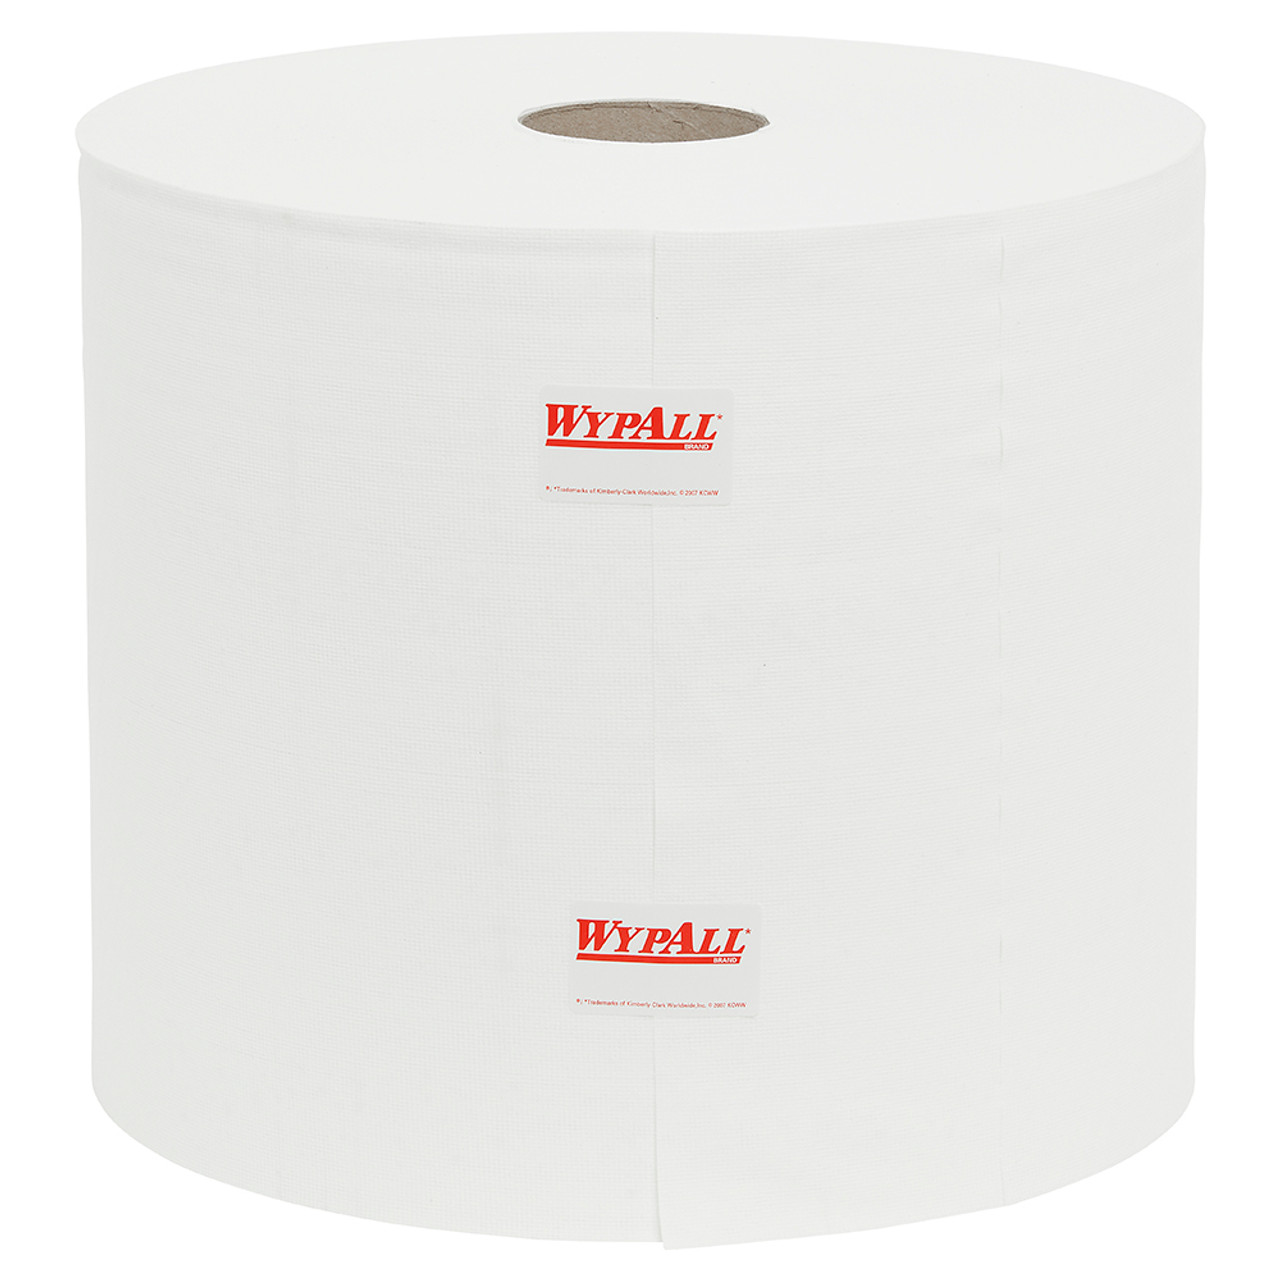 Stamp Roll Dispenser for 100 Stamps Roll Holds (Stamps Not Included), for Office Home, Size: 1 Pcs, White